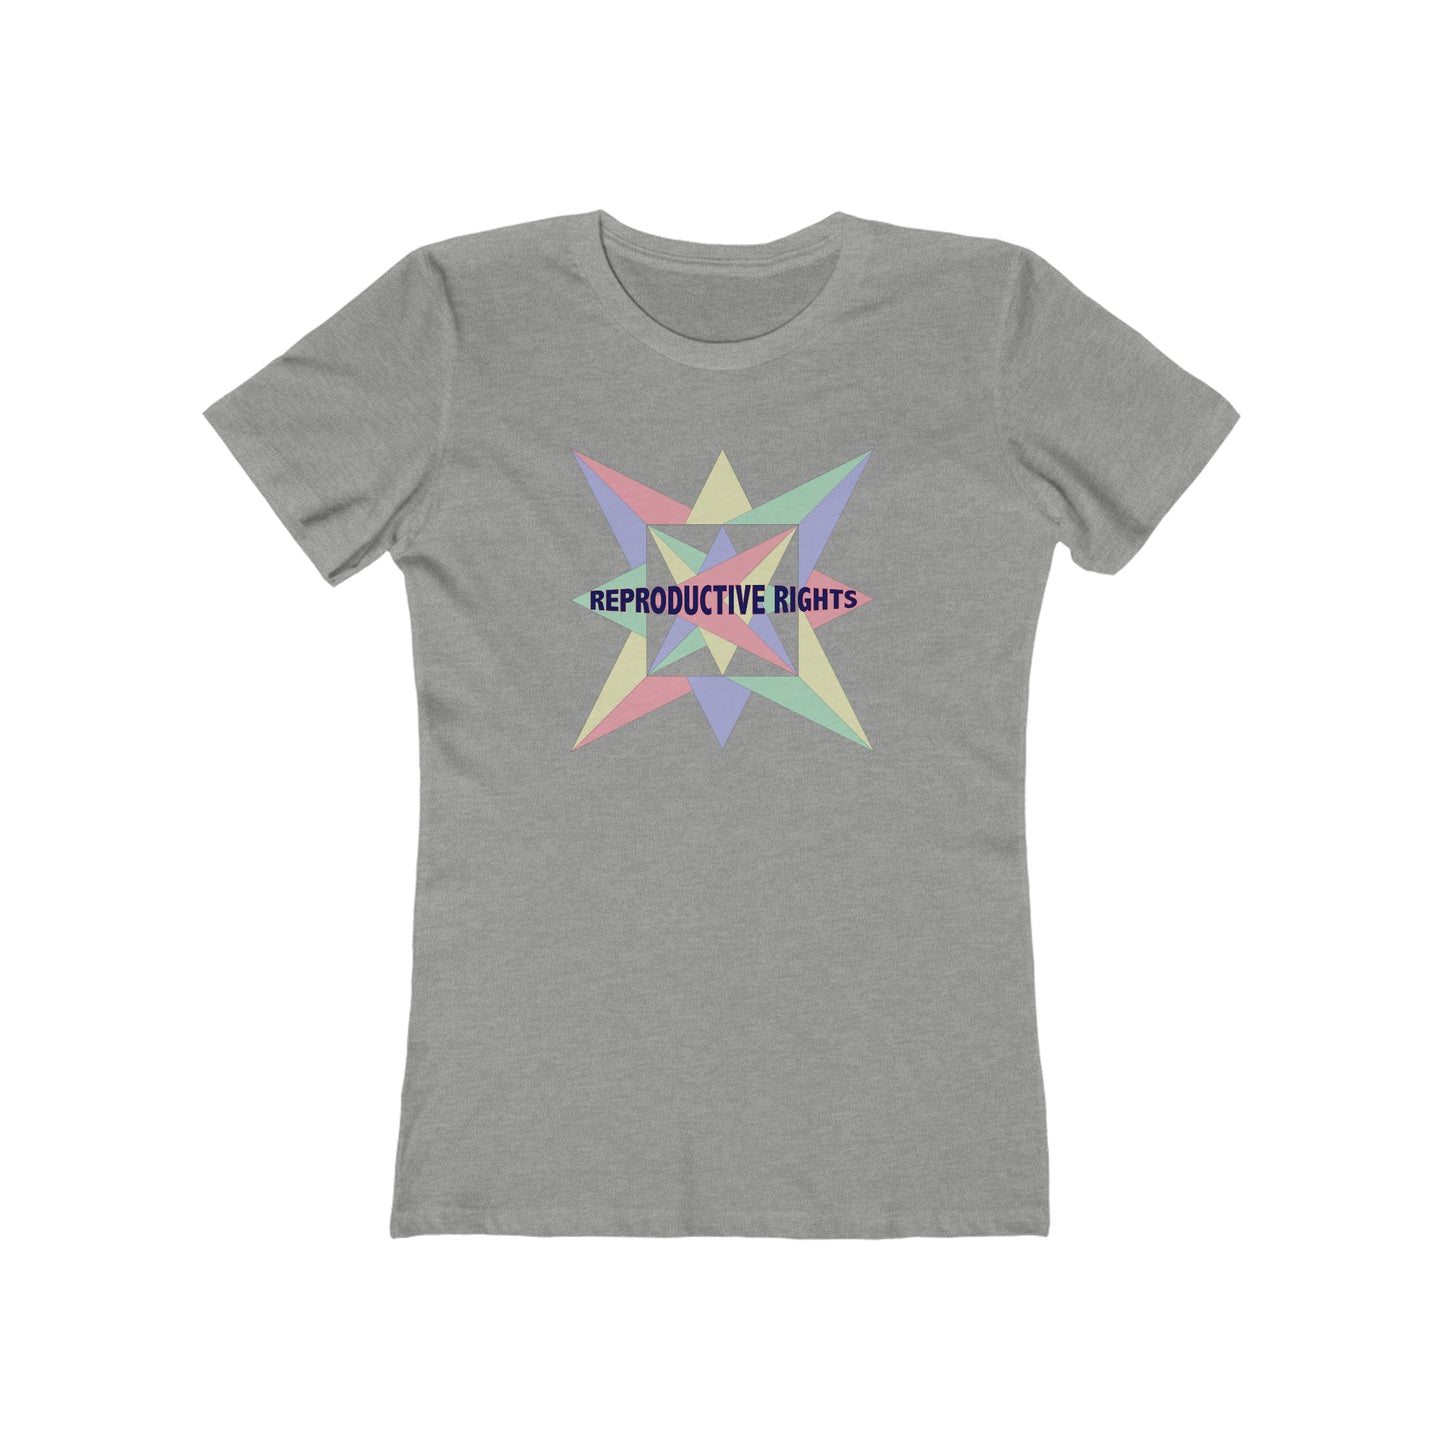 Reproductive Rights - Women's T-Shirt